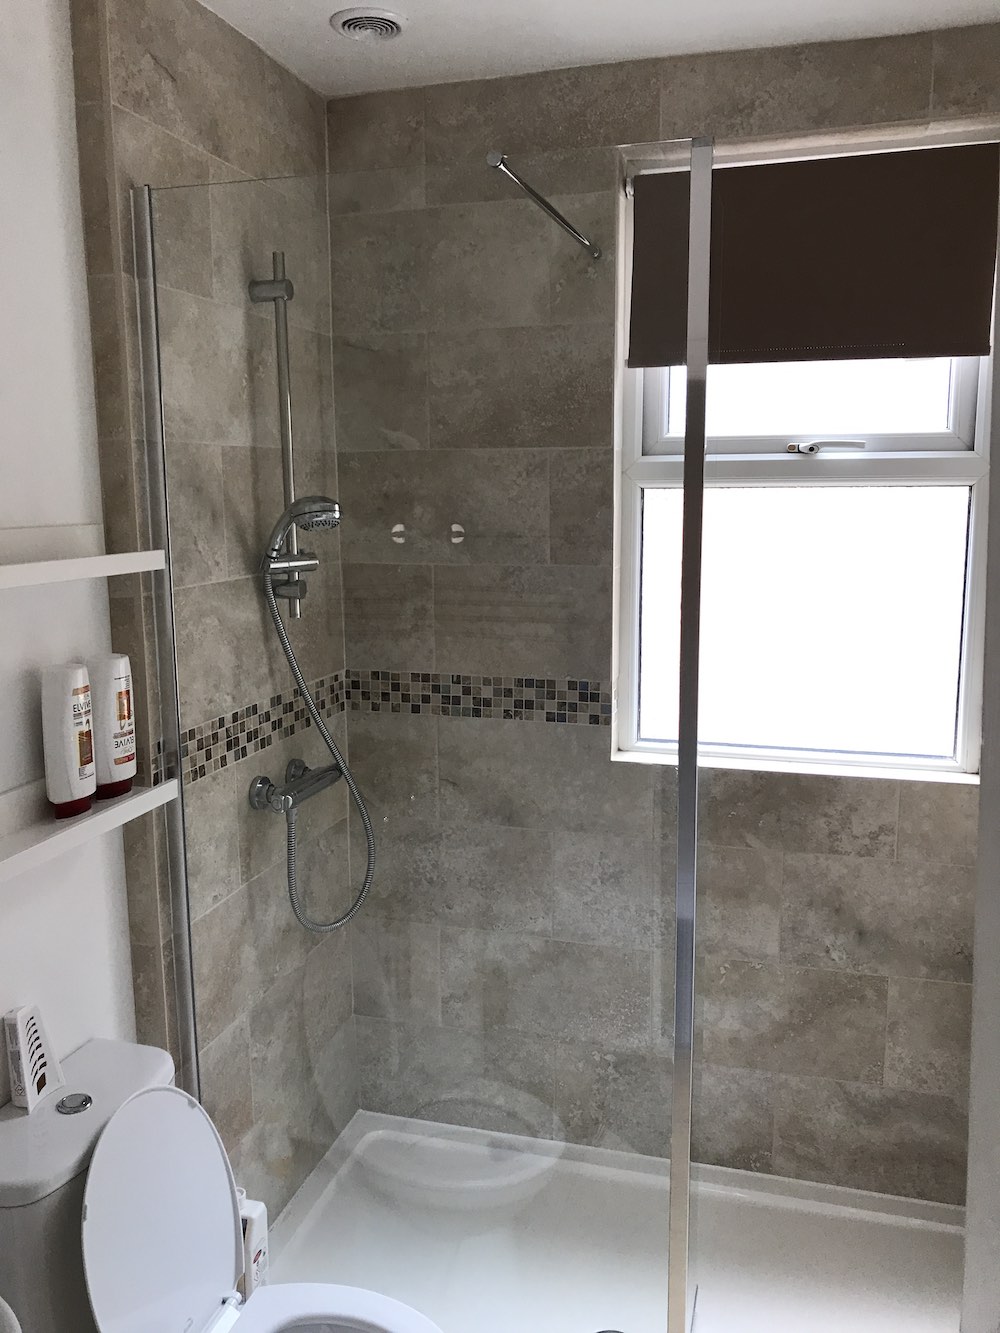 Shower in the large bathroom